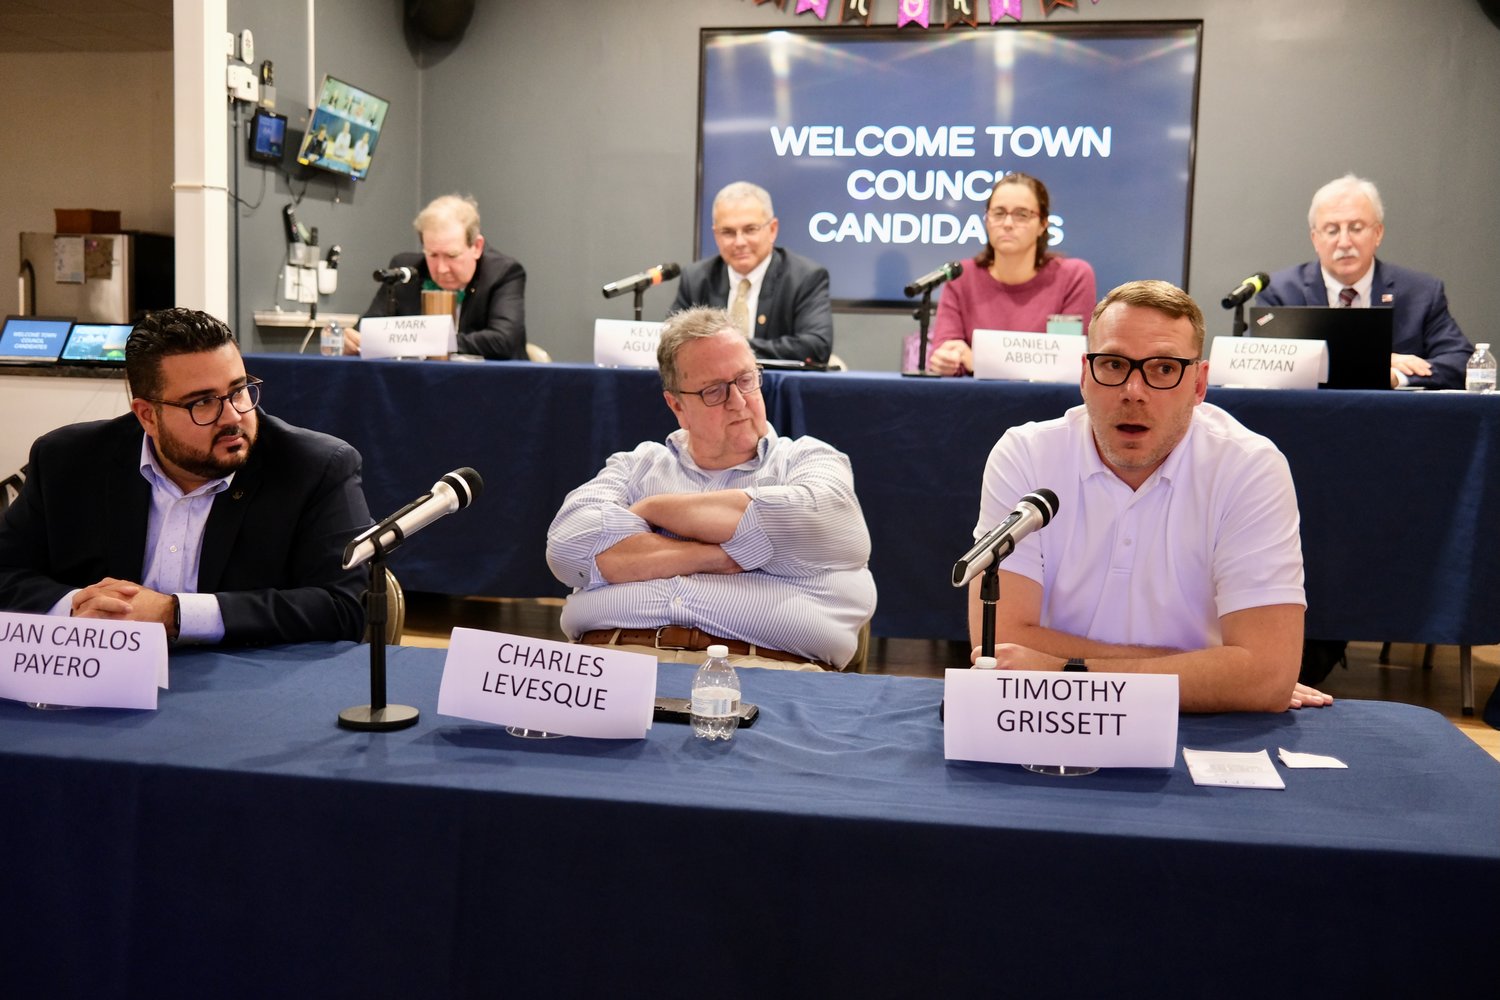 Portsmouth Dems have candidates’ forum all to themselves EastBayRI